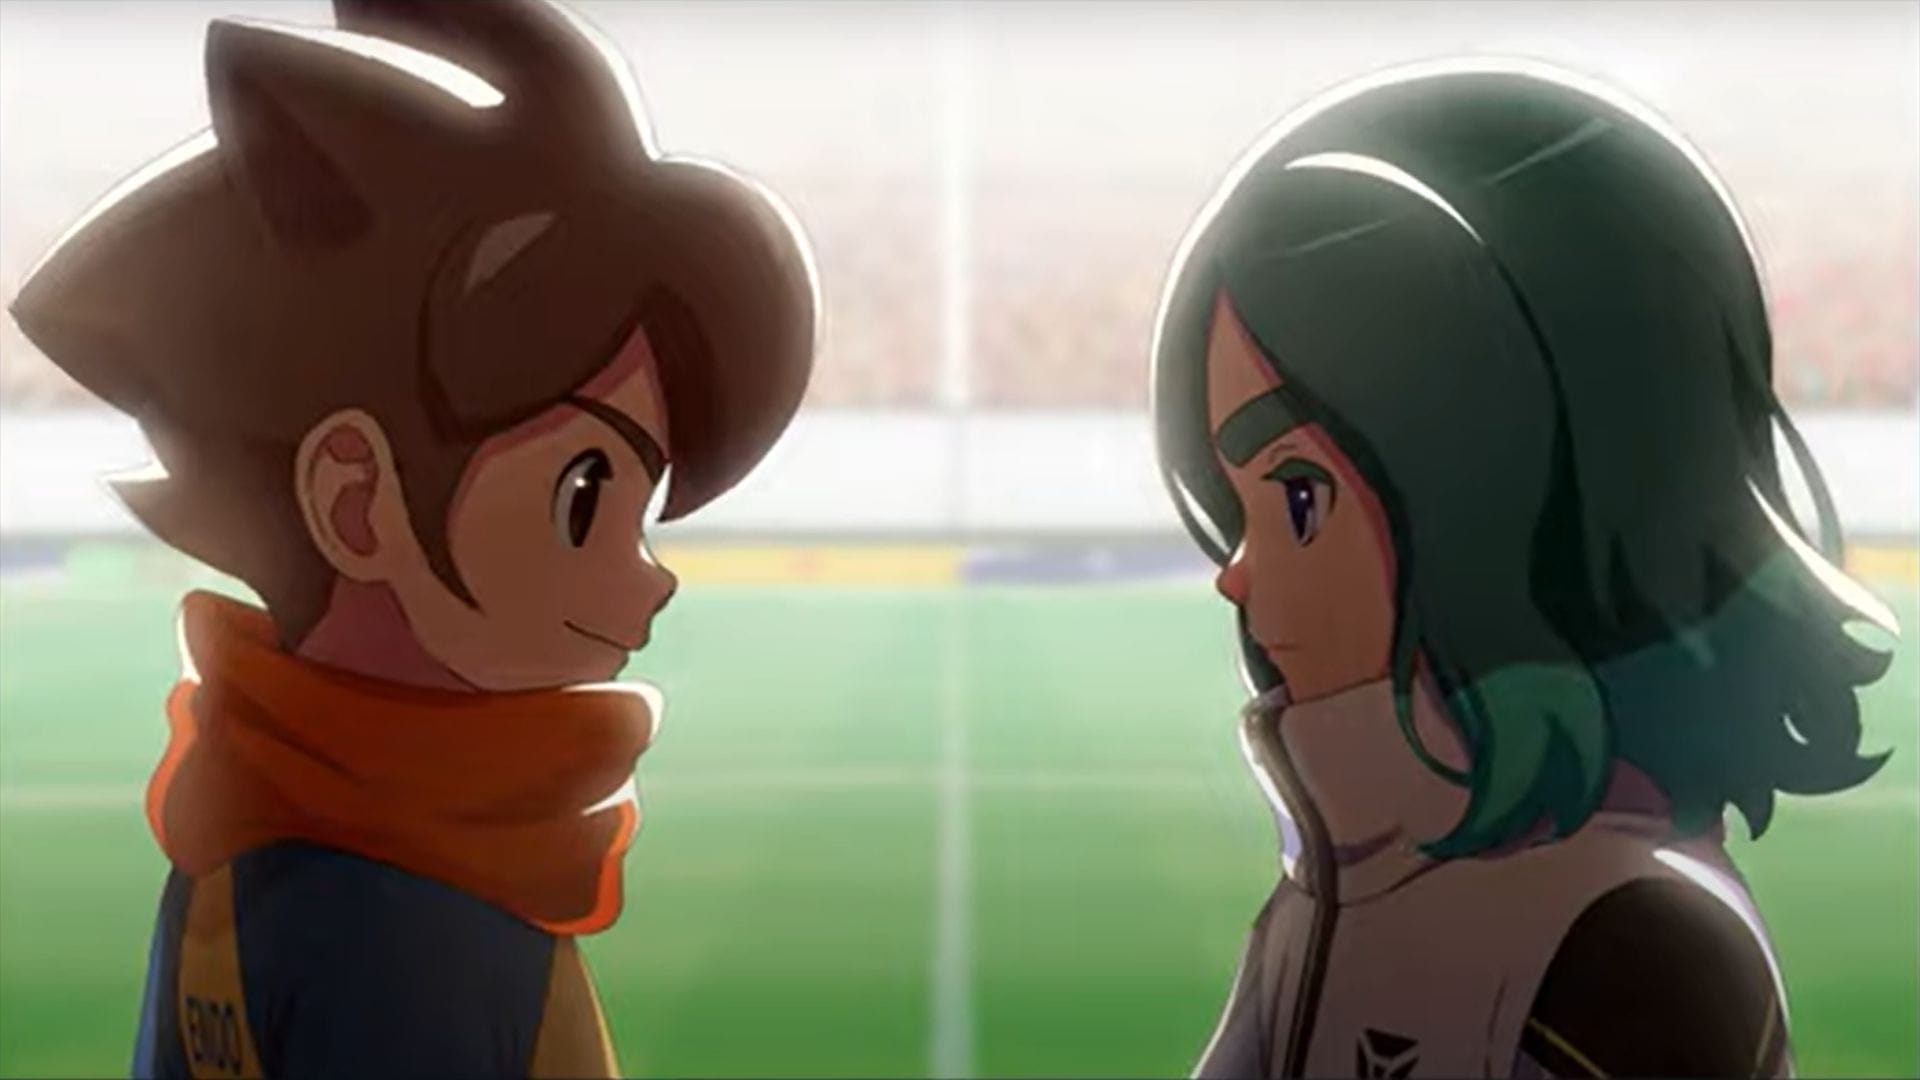 Inazuma Eleven: Victory Road Shows Anime Cutscene by Mappa & Gameplay in New Trailer